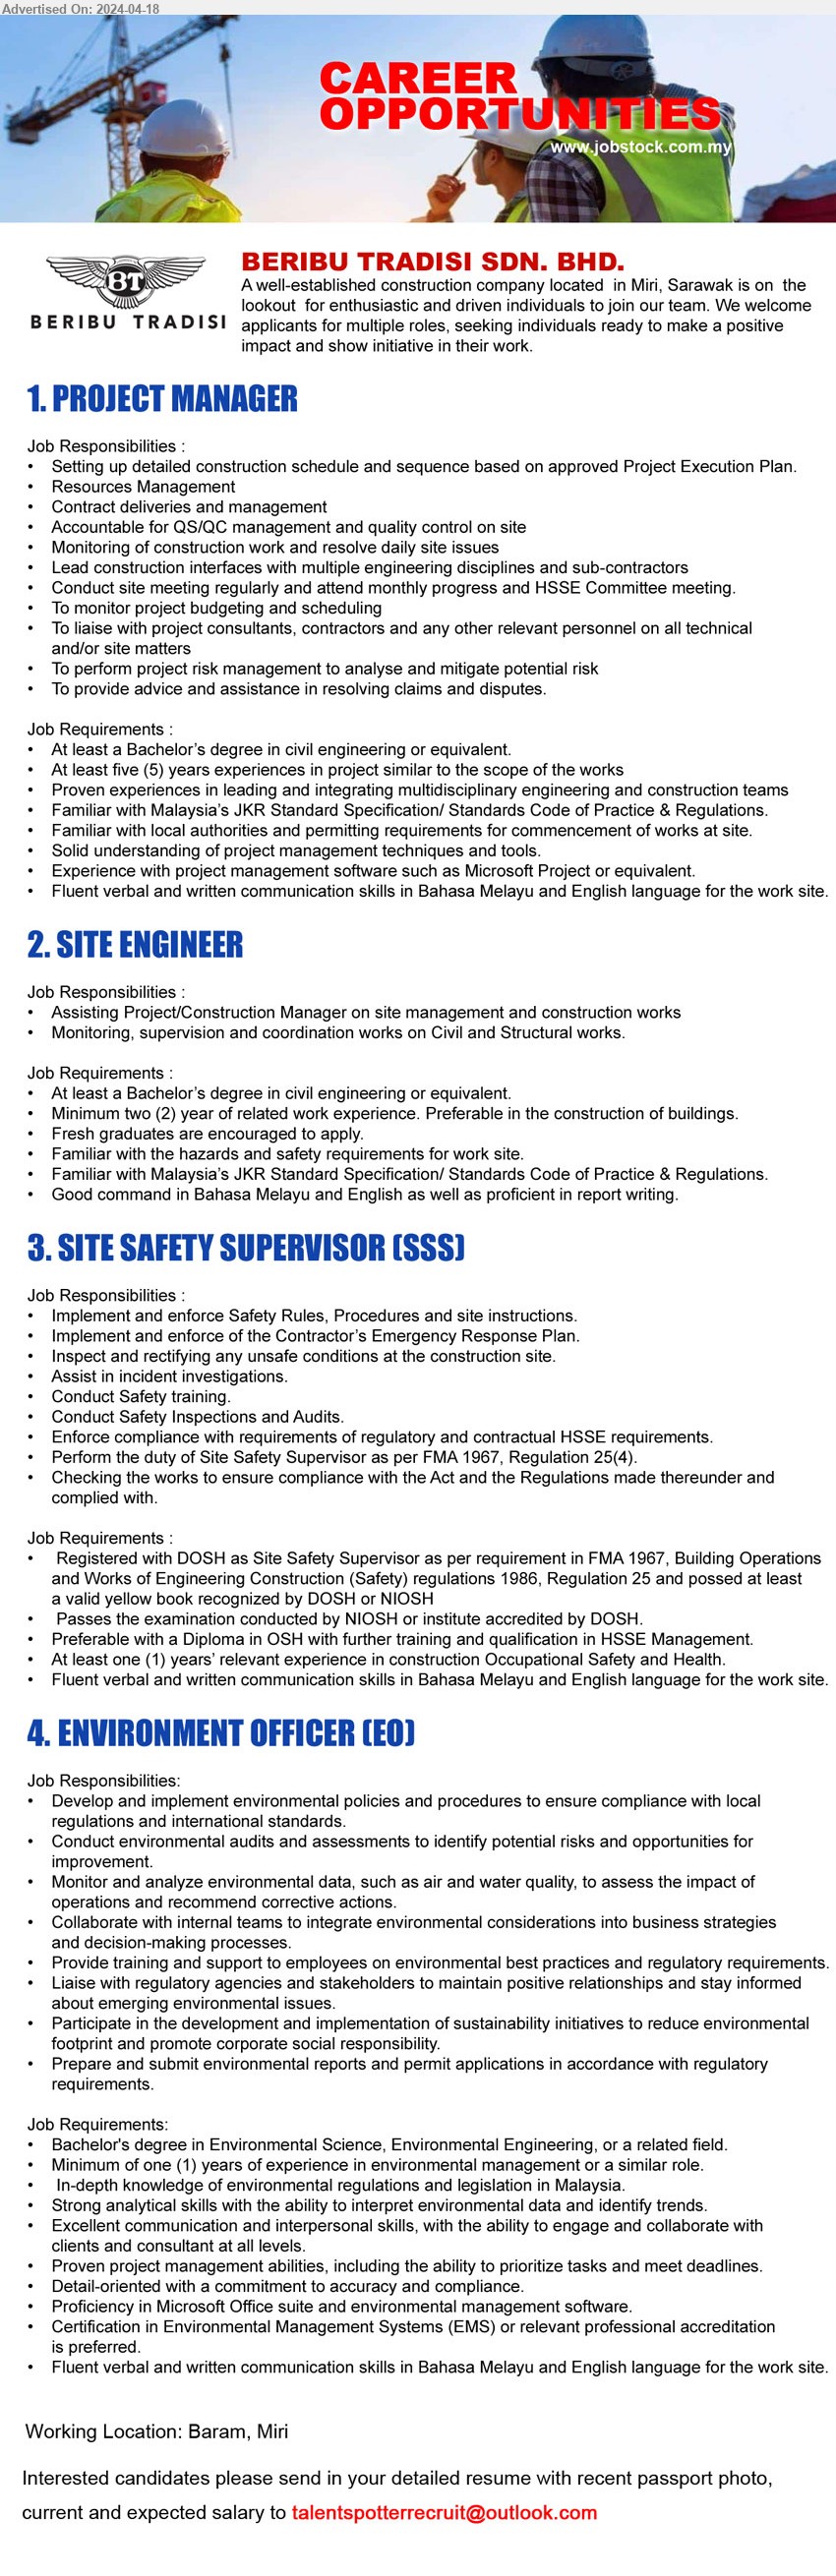 BERIBU TRADISI SDN BHD - 1. PROJECT MANAGER  (Baram, Miri), Degree in Civil Engineering or equivalent, 5 years experiences in project similar to the scope of the works,...
2. SITE ENGINEER (Baram, Miri), Degree in Civil Engineering or equivalent, min. 2 year of related work experience. Preferable in the construction of buildings, Fresh graduates are encouraged to apply,...
3. SITE SAFETY SUPERVISOR (SSS) (Baram, Miri), Registered with DOSH as Site Safety Supervisor, Passes the examination conducted by NIOSH or institute accredited by DOSH,...
4. ENVIRONMENT OFFICER (EO) (Baram, Miri), Degree in Environmental Science, Environmental Engineering, or a related field, min. 1 years of experience in environmental management or a similar role,...
Email resume to...